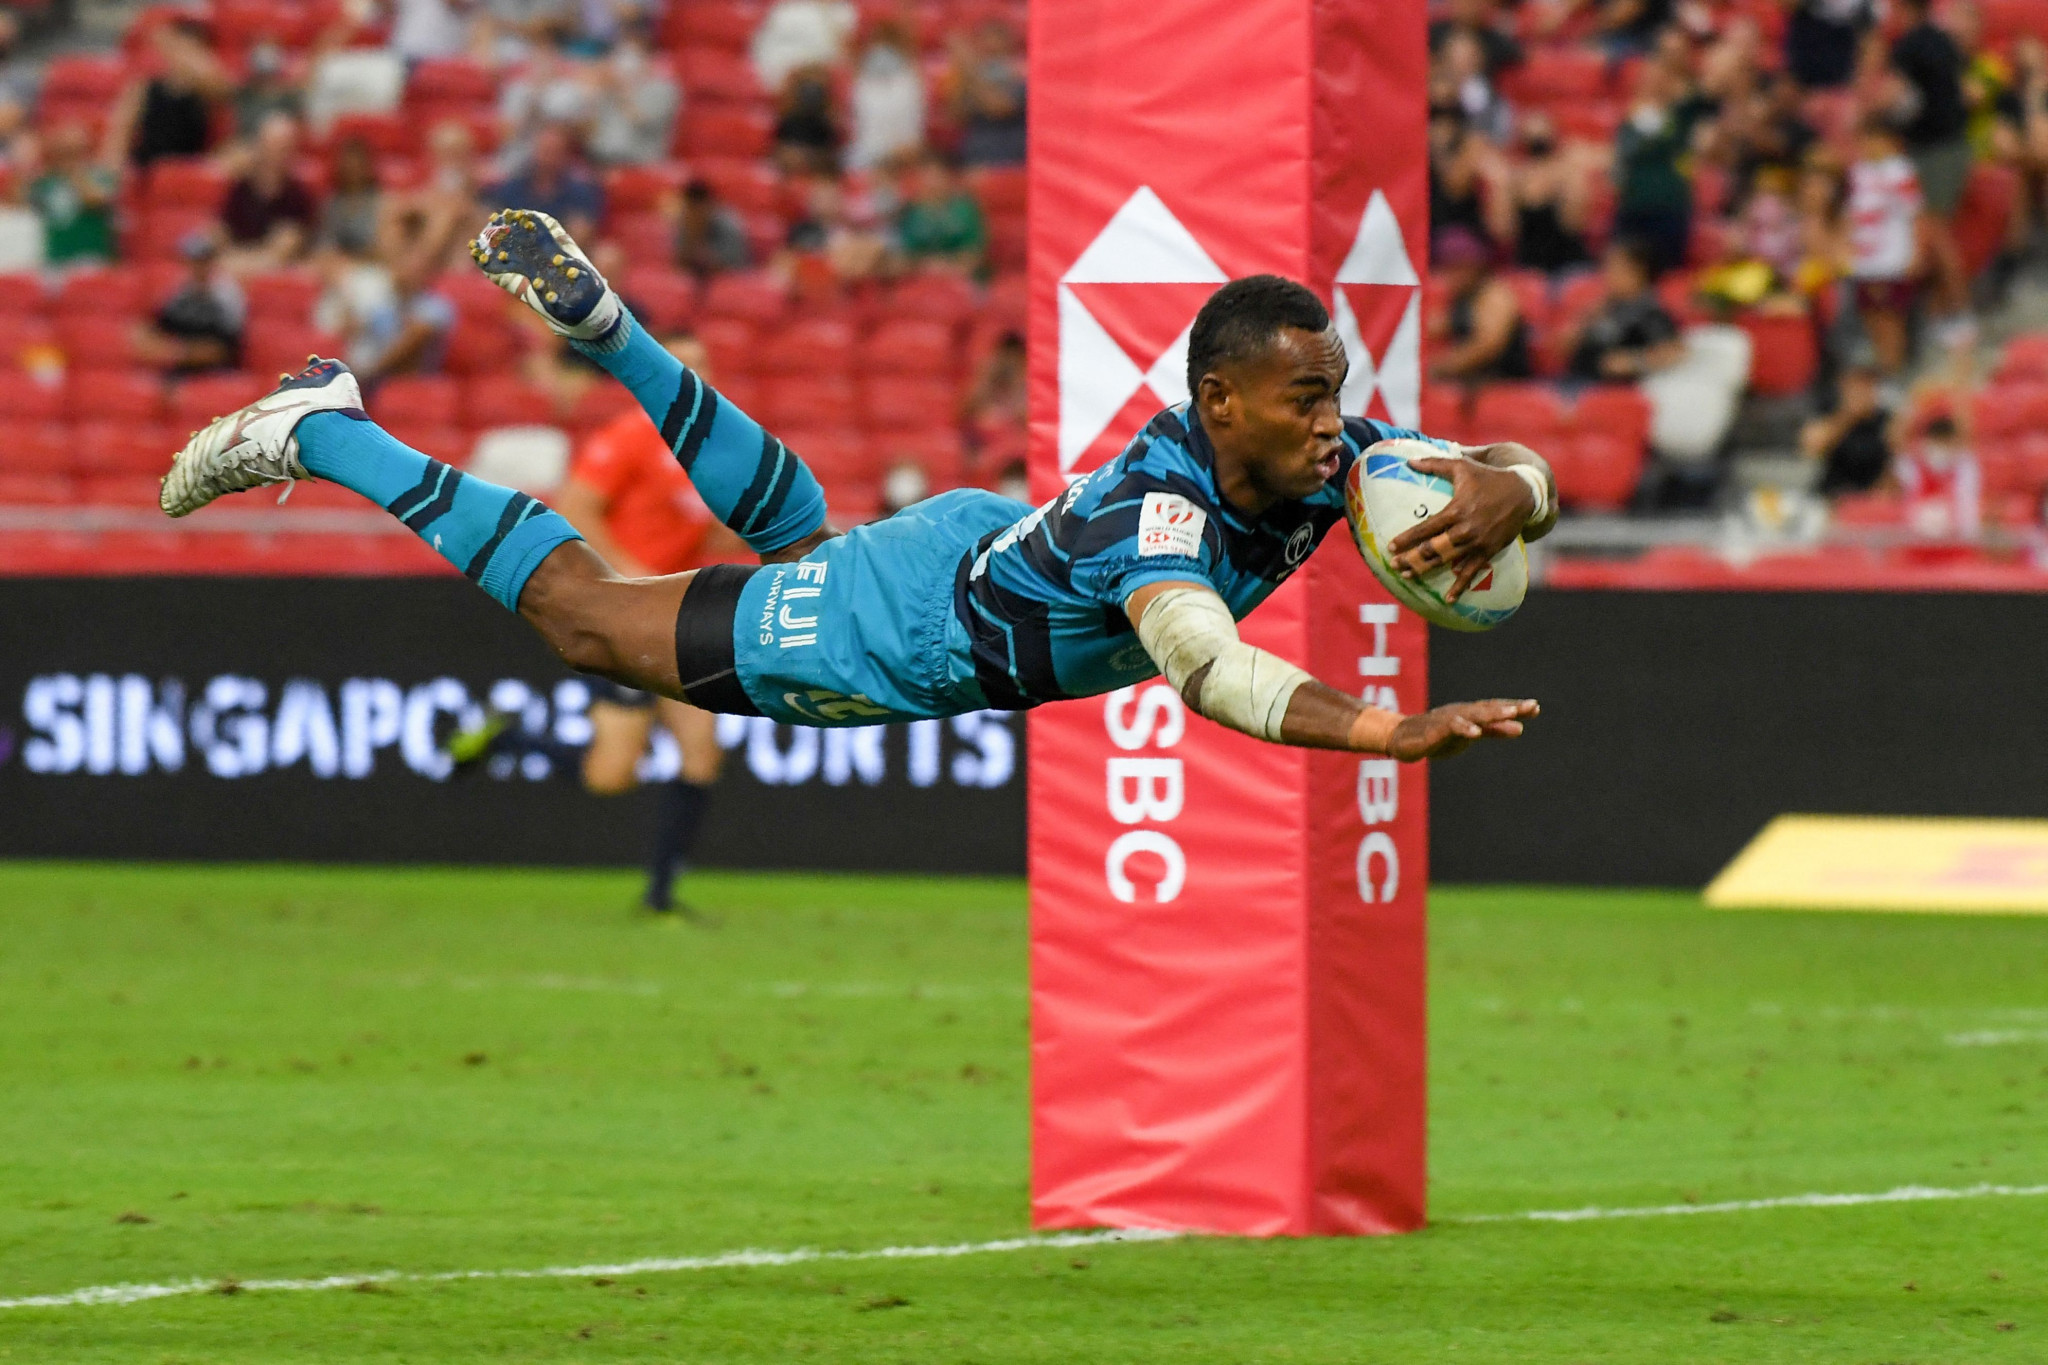 Fiji win Tokyo 2020 final rematch at World Rugby Sevens Series in Singapore